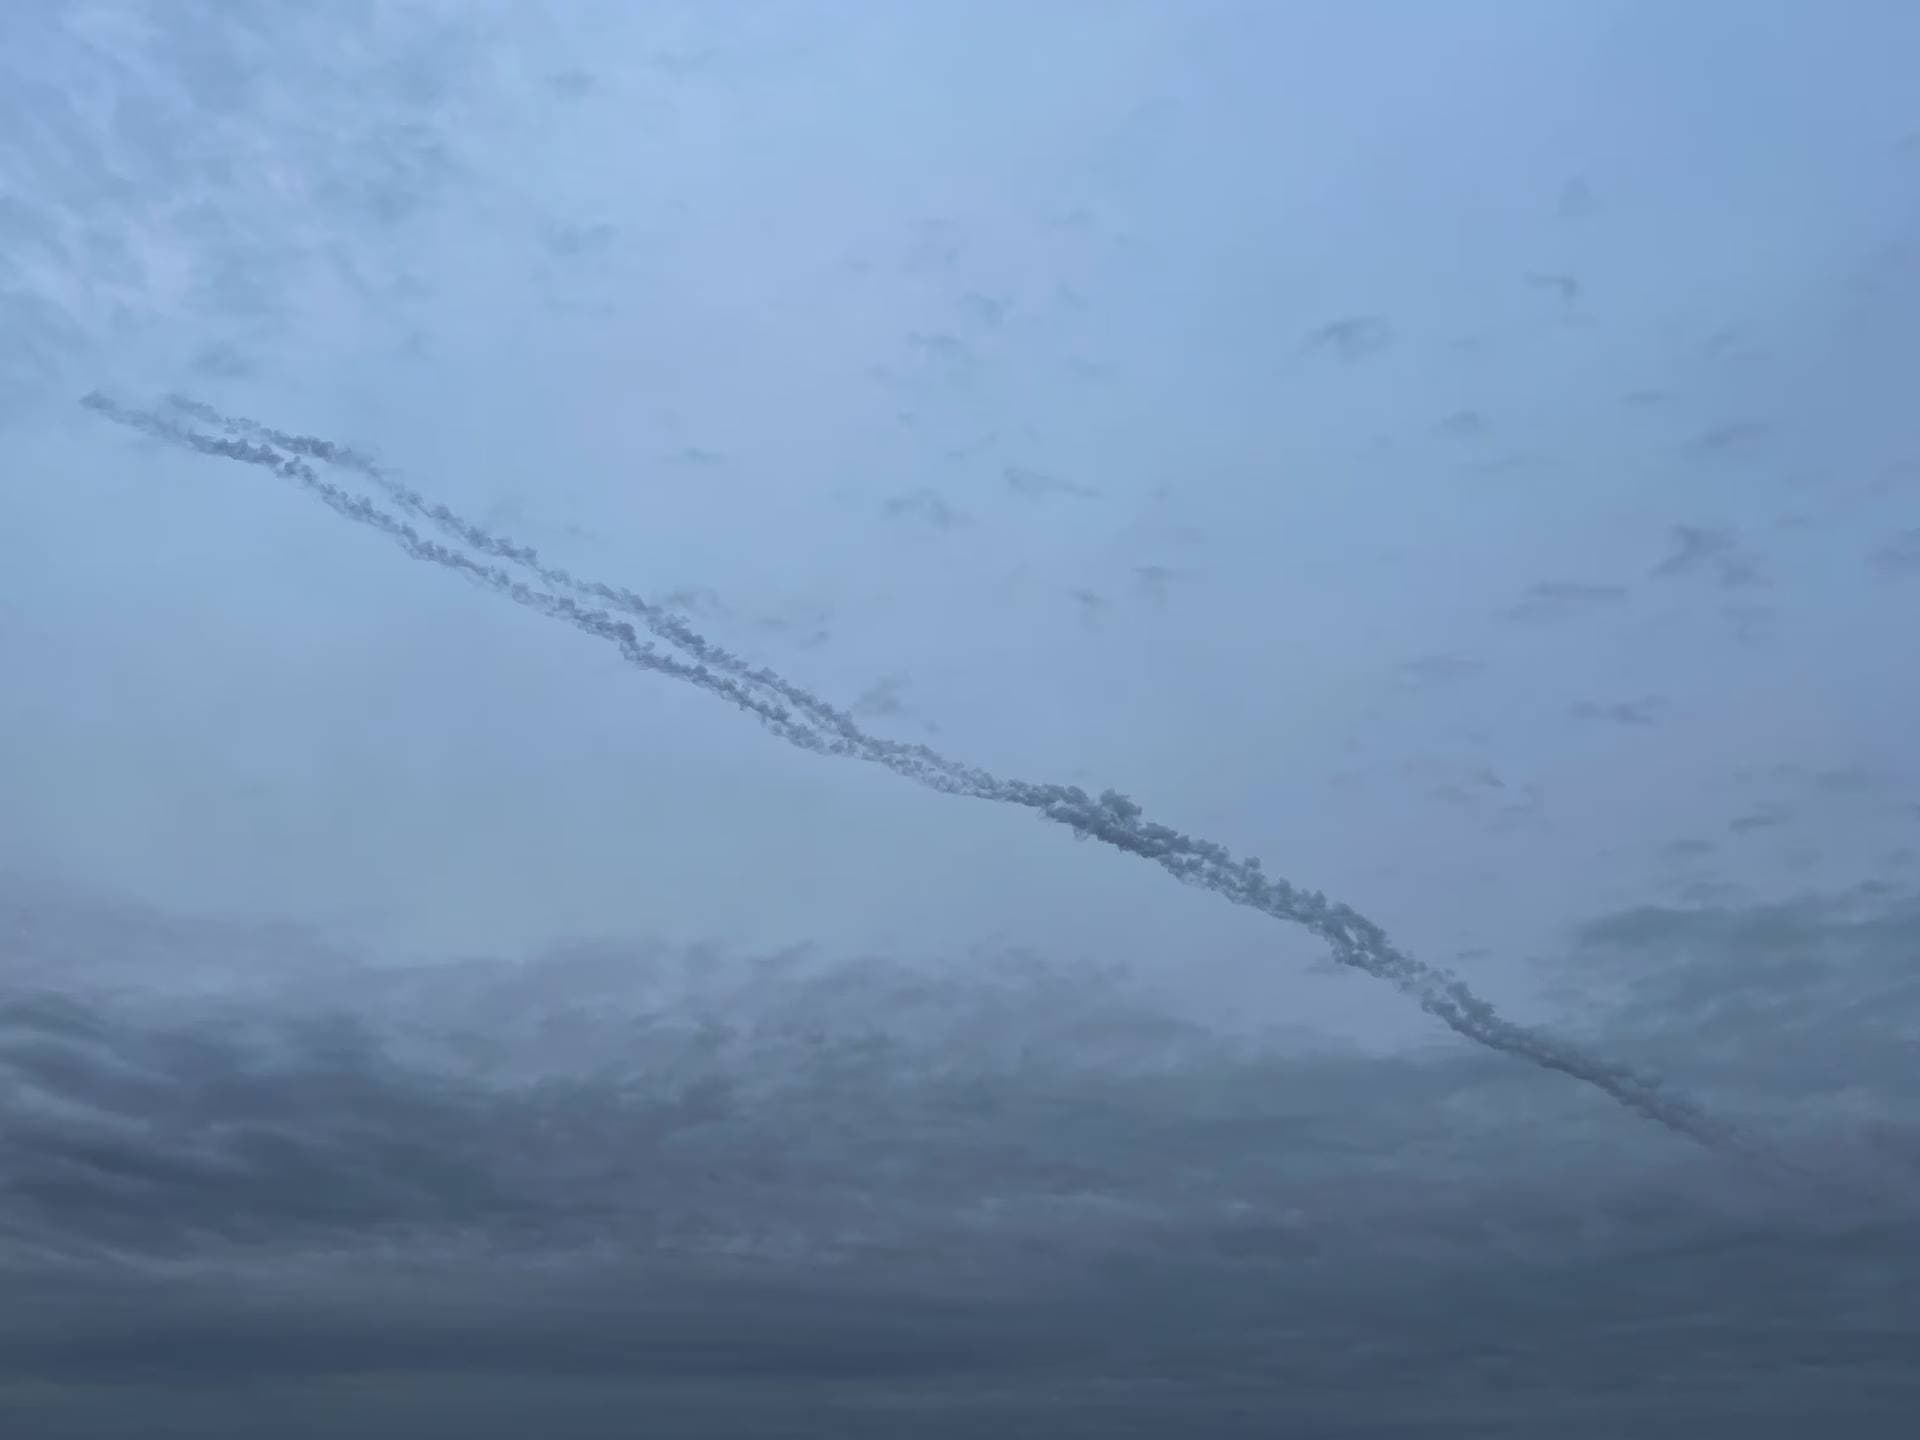 Missile traces in the sky over the city after a Russian missile strike in Kyiv